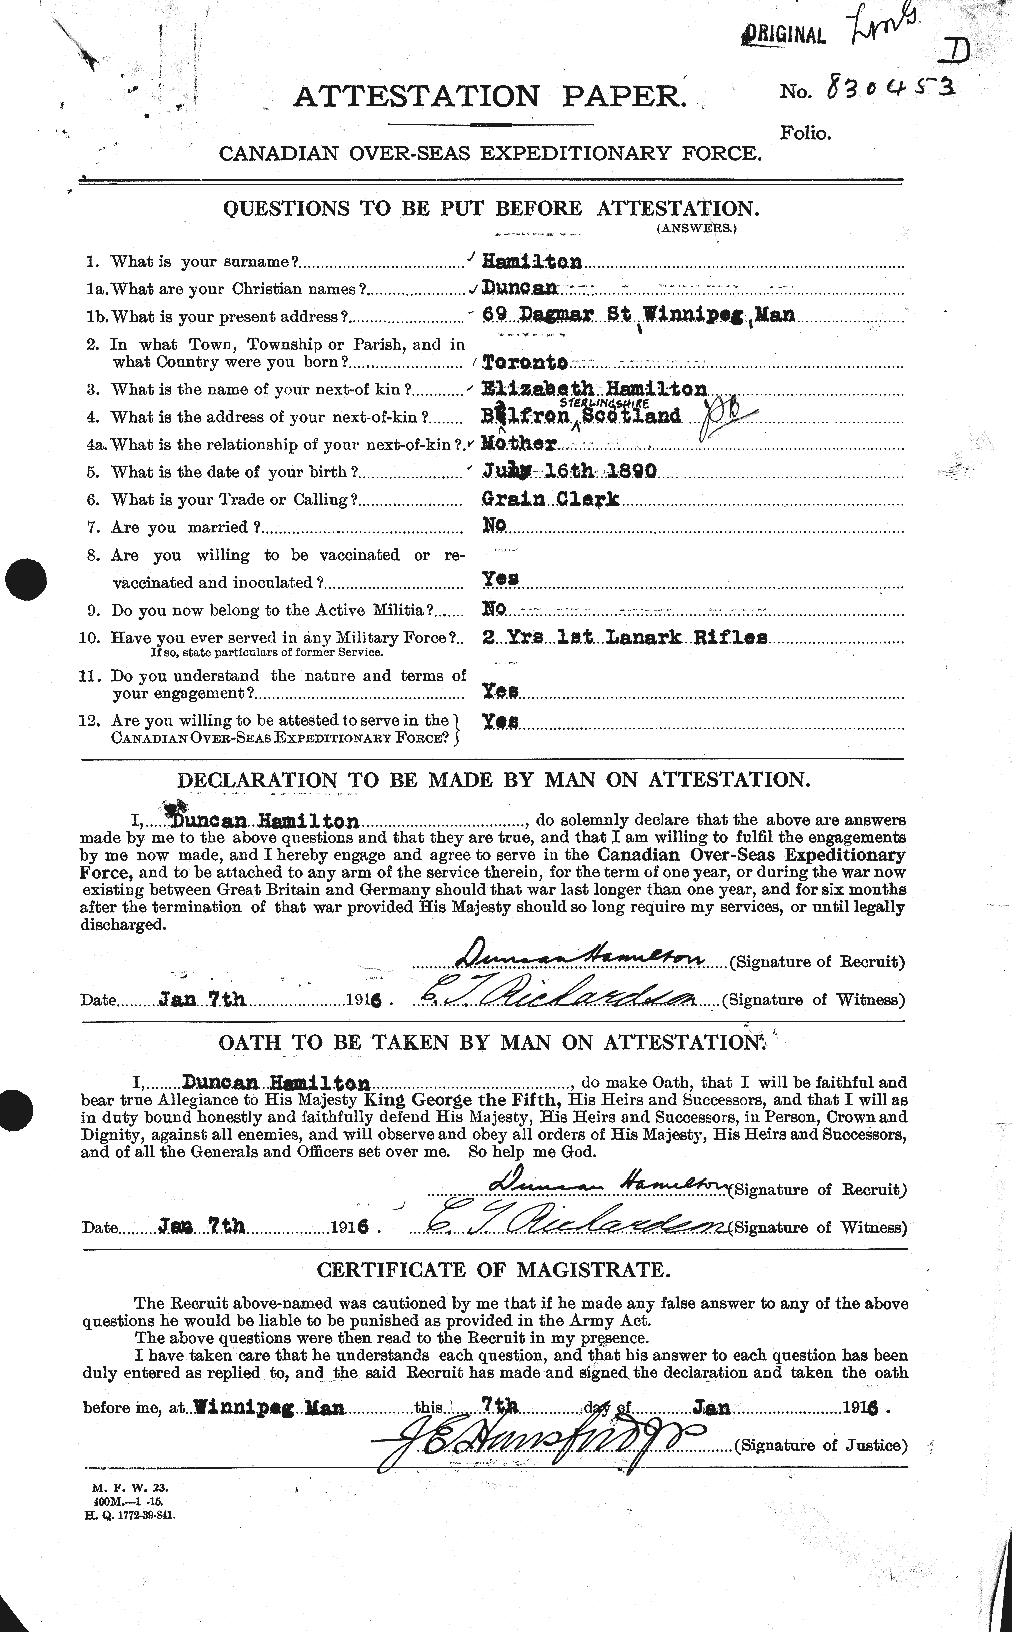 Personnel Records of the First World War - CEF 375365a